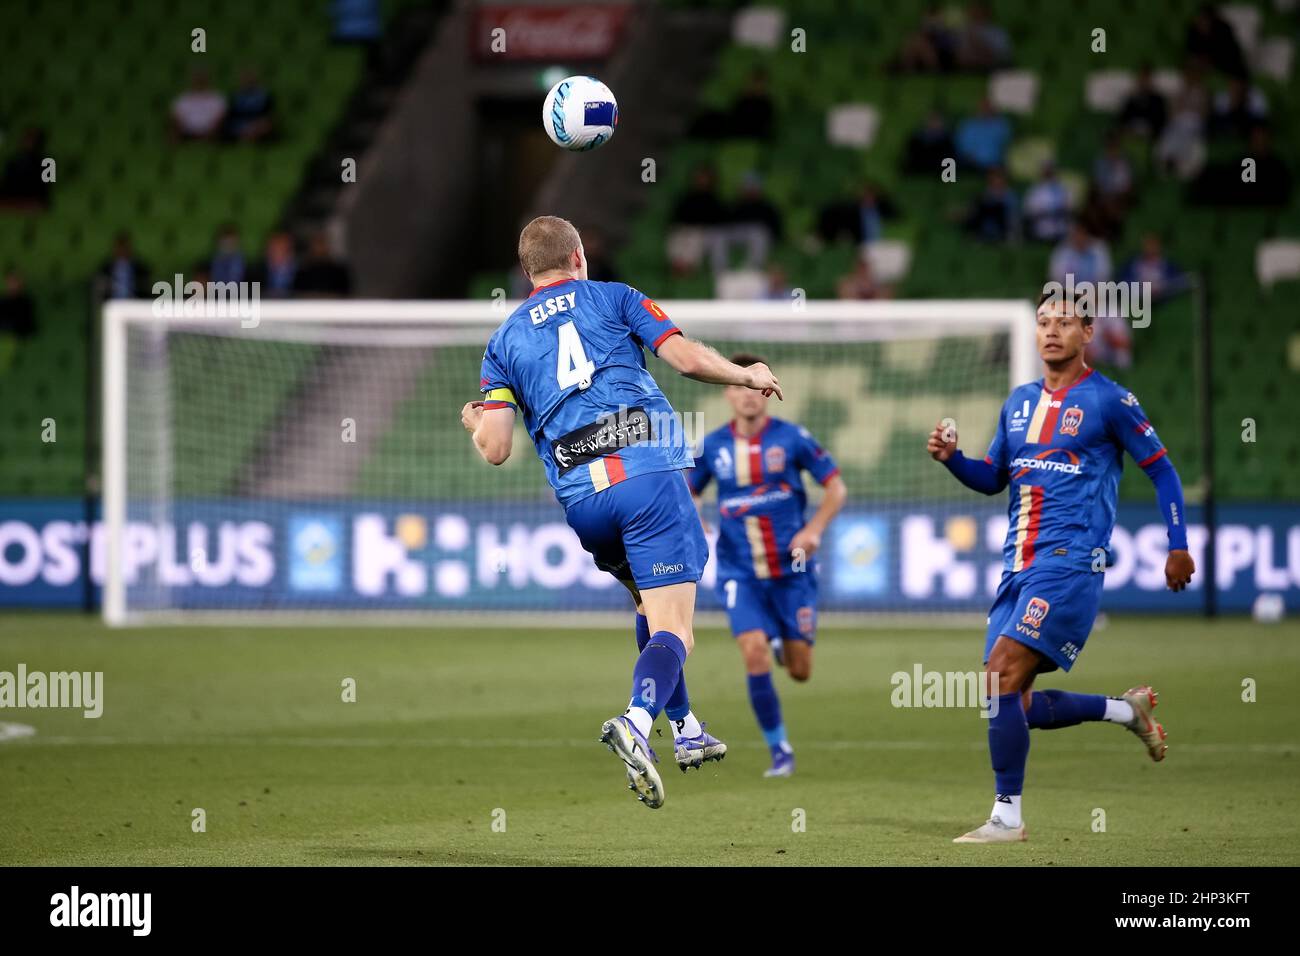 Melbourne, Australia, 18 February, 2022. Jordan Elsey of Newcastle Jets heads the ball during the A-League soccer match between Melbourne City FC and Newcastle Jets at AAMI Park on February 18, 2022 in Melbourne, Australia. Credit: Dave Hewison/Speed Media/Alamy Live News Stock Photo